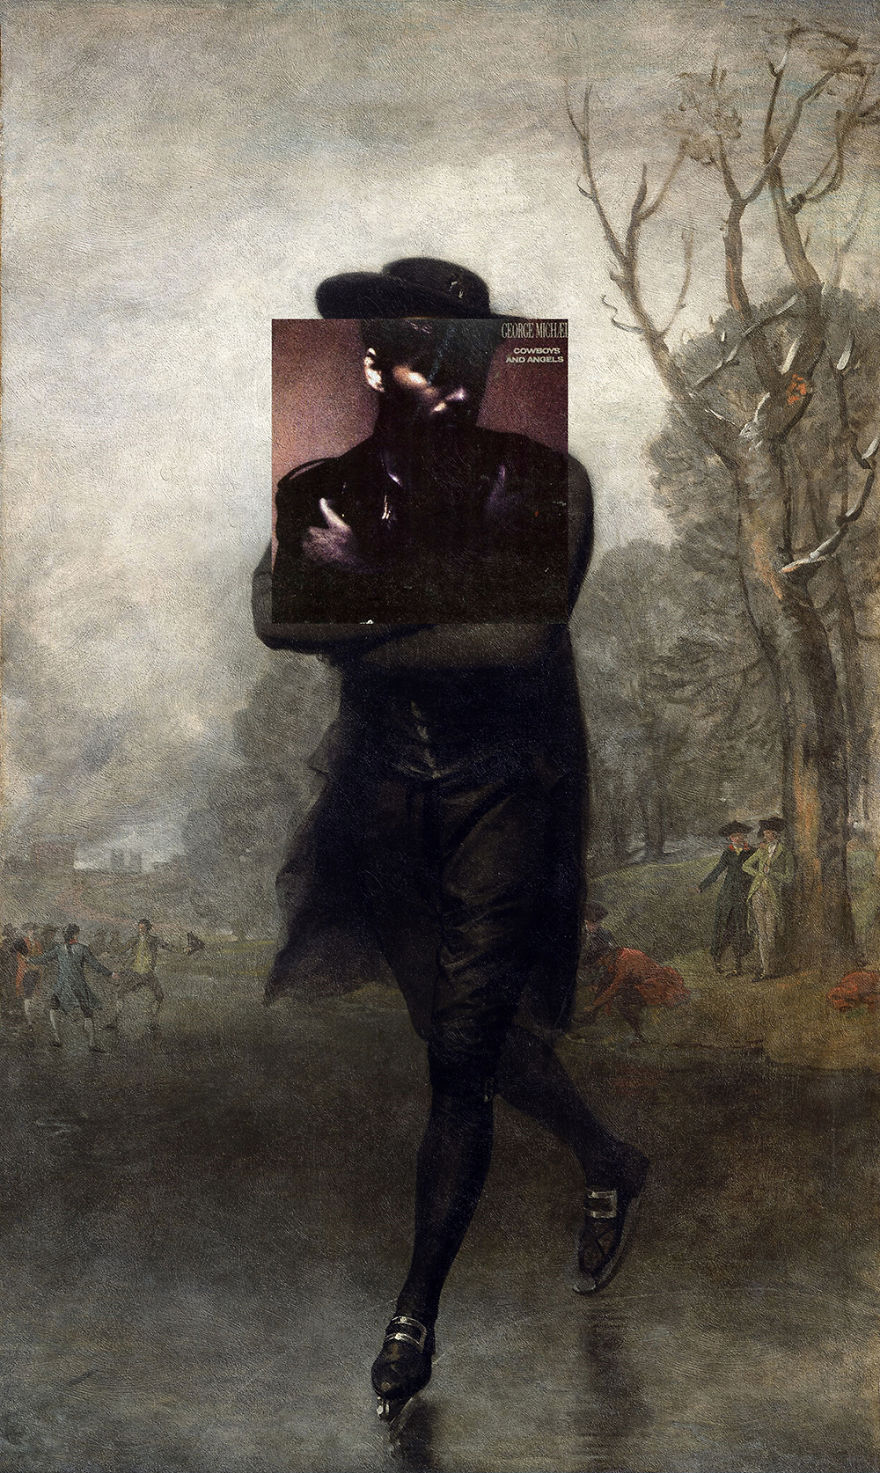 I Combine Album Covers With Classical Paintings As A Tribute To George Michael